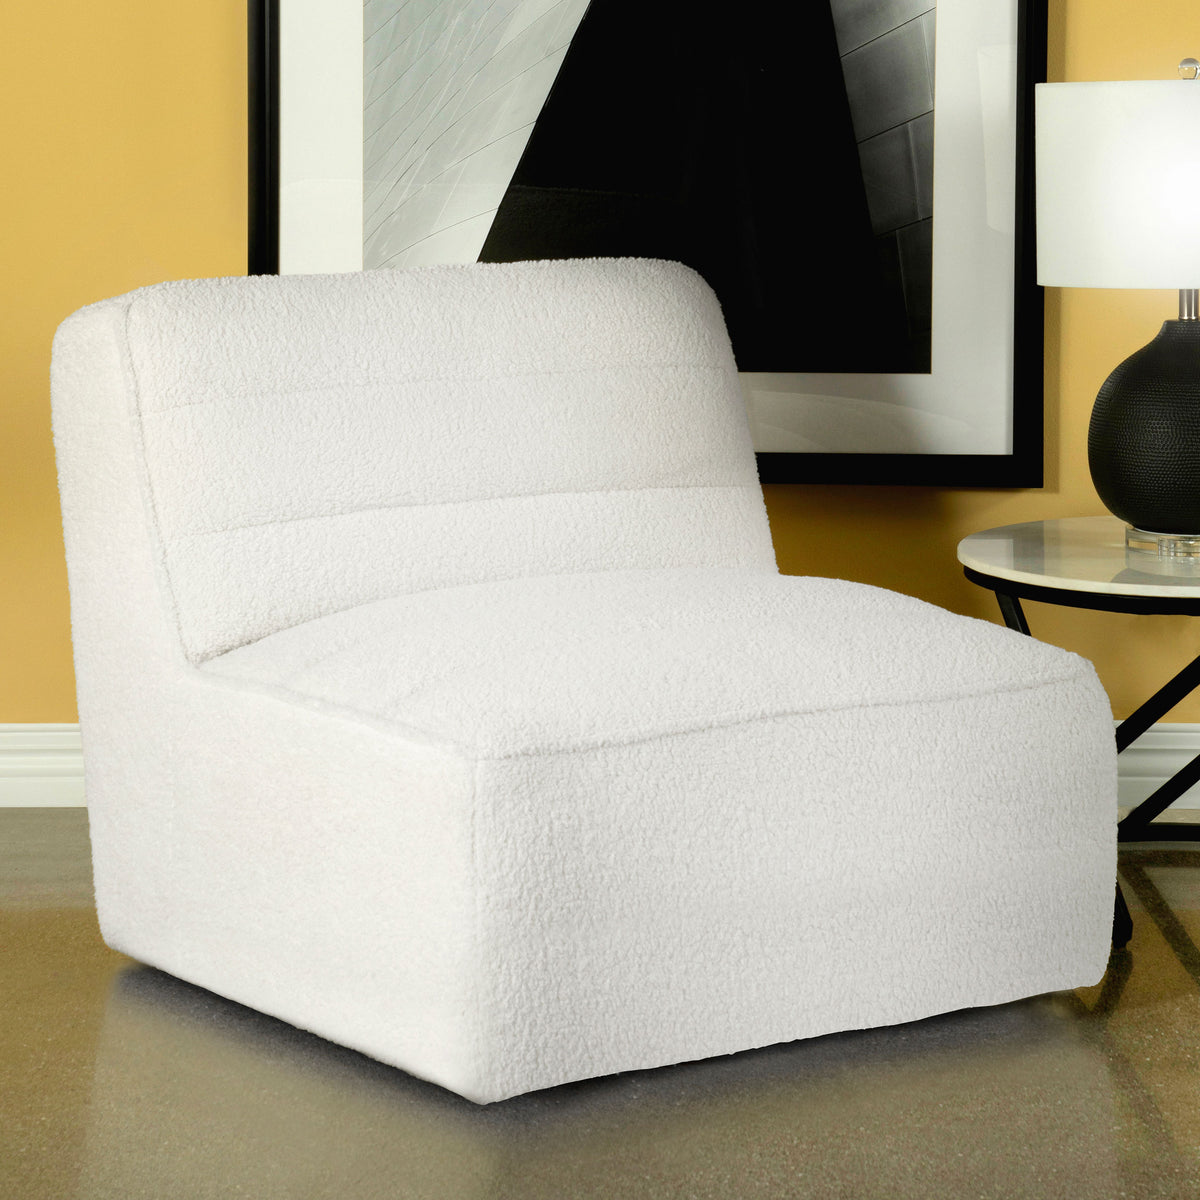 Cobie Upholstered Swivel Armless Chair - Half Price Furniture